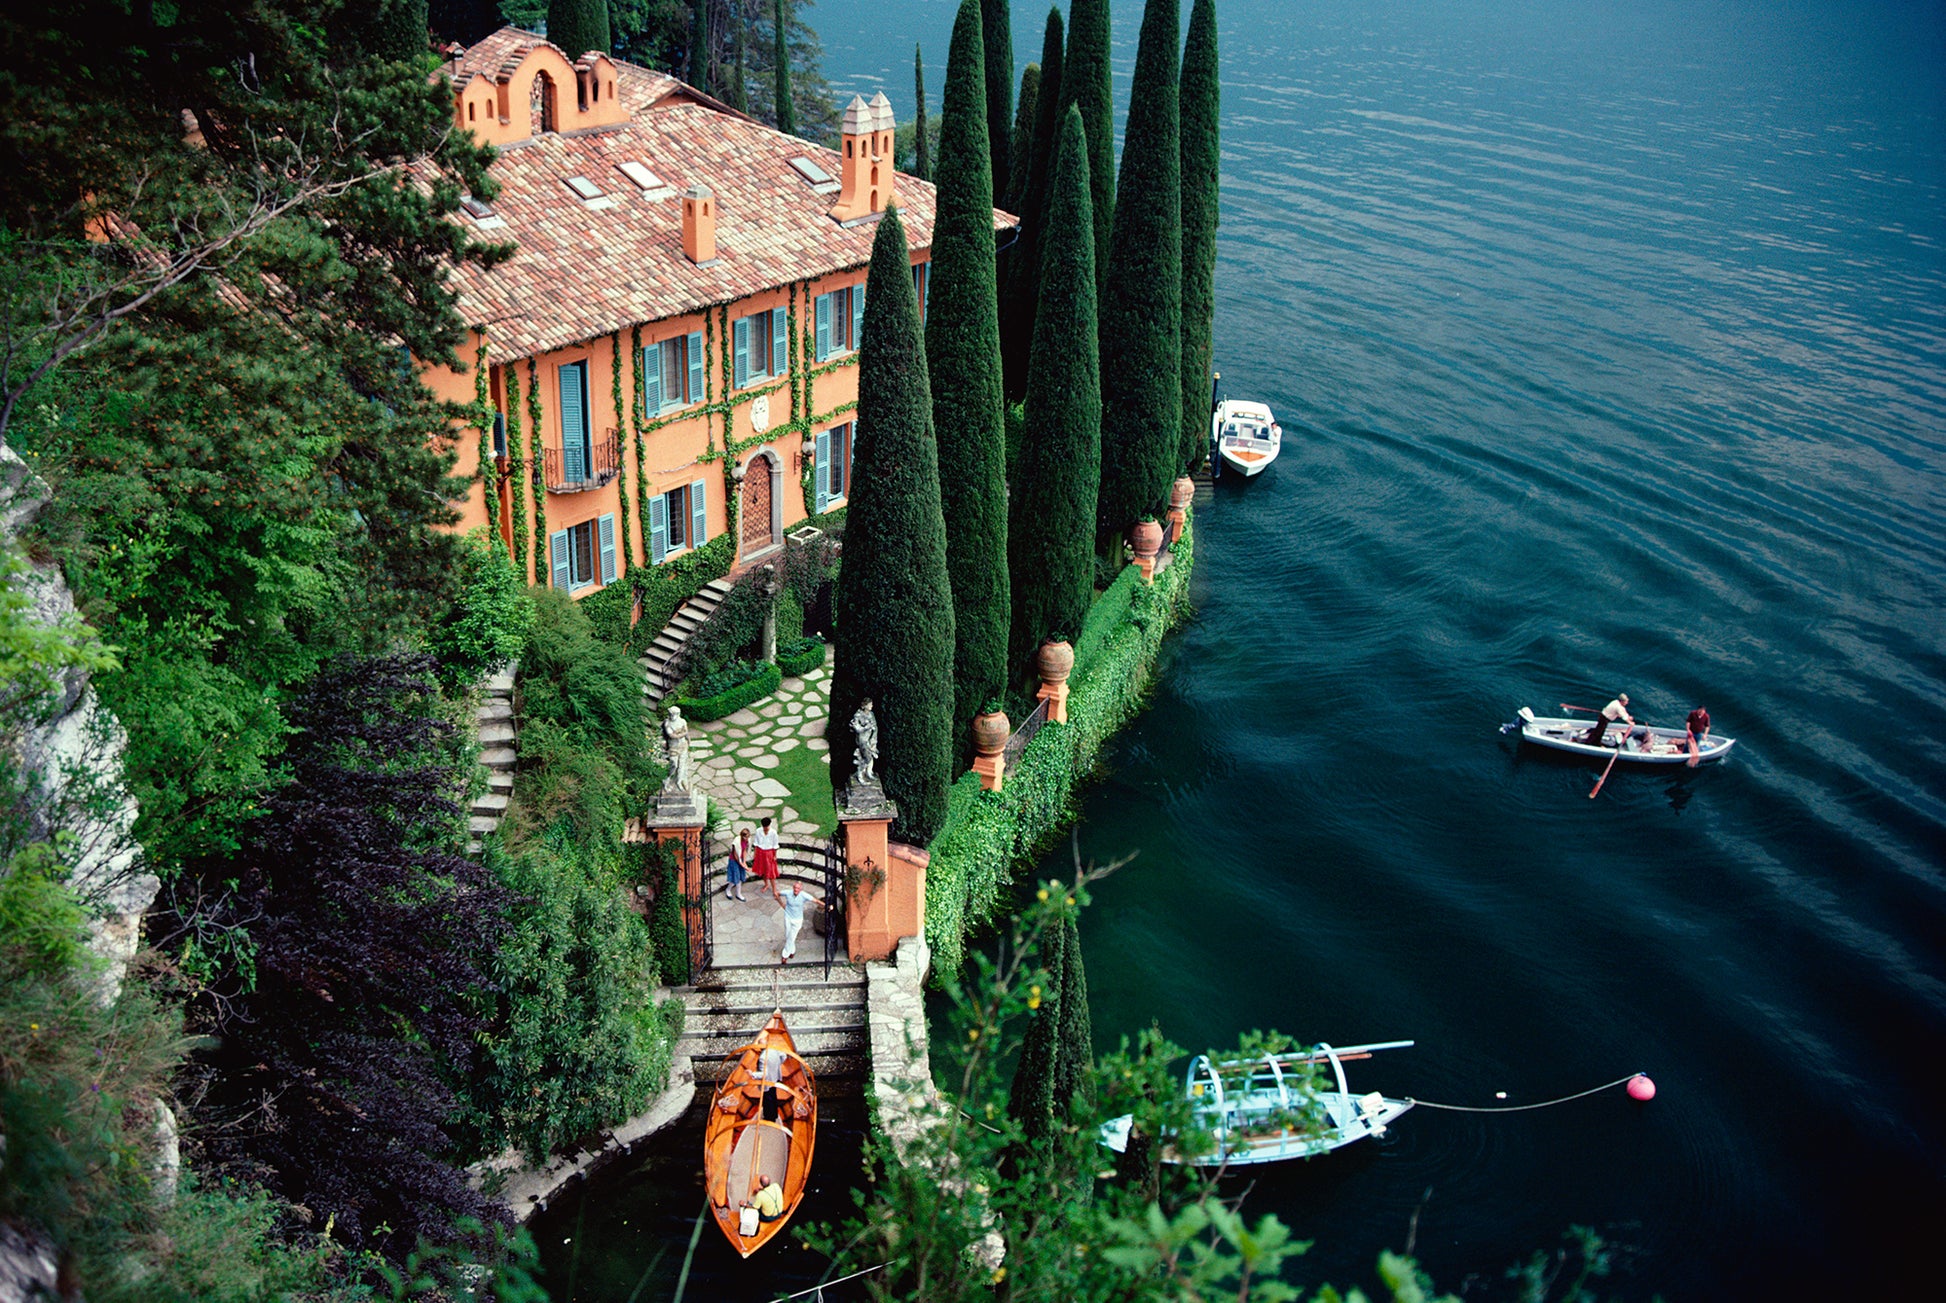 Slim Aarons: Giacomo Montegazza, Lake Como, Italy photo for sale Getty Images Gallery